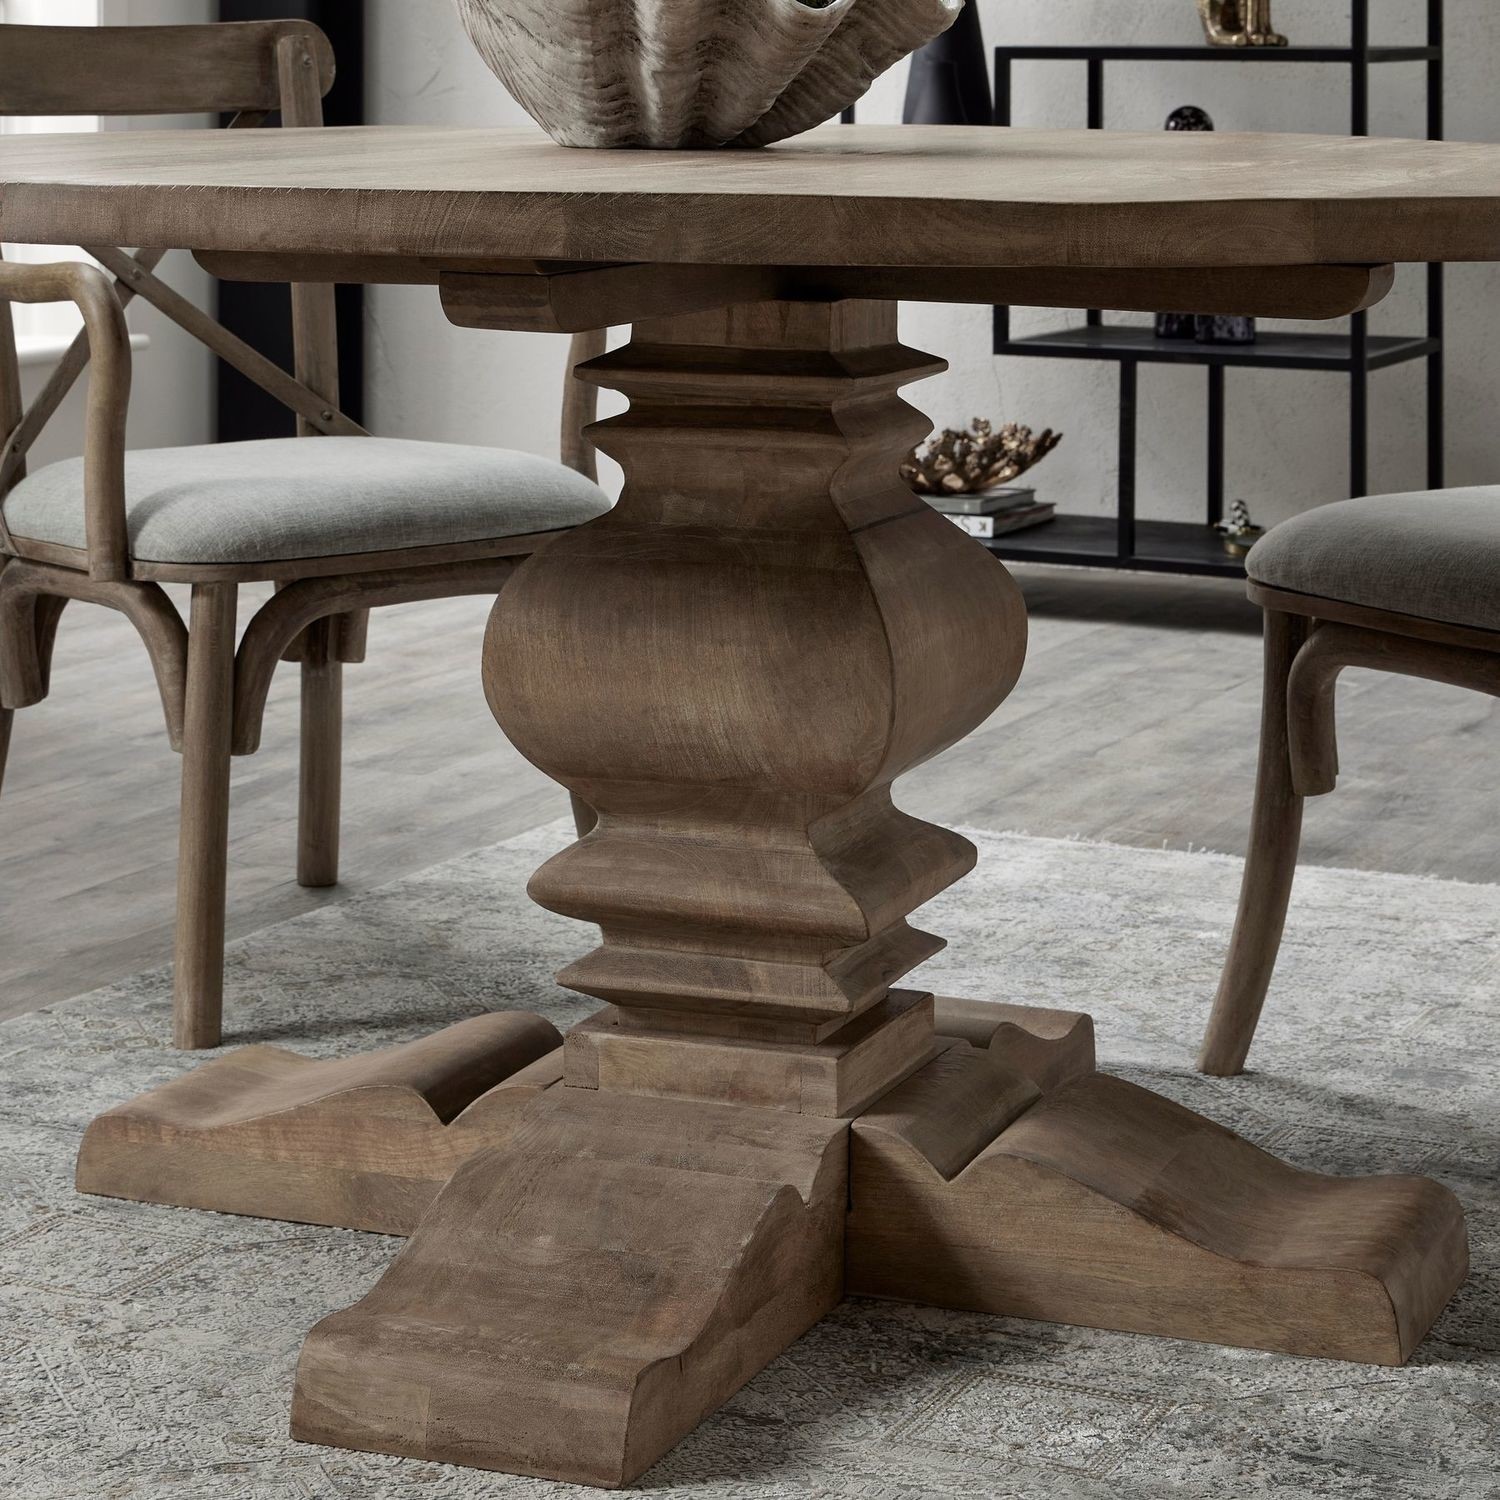 Read more about Soild wood round pedestal dining table